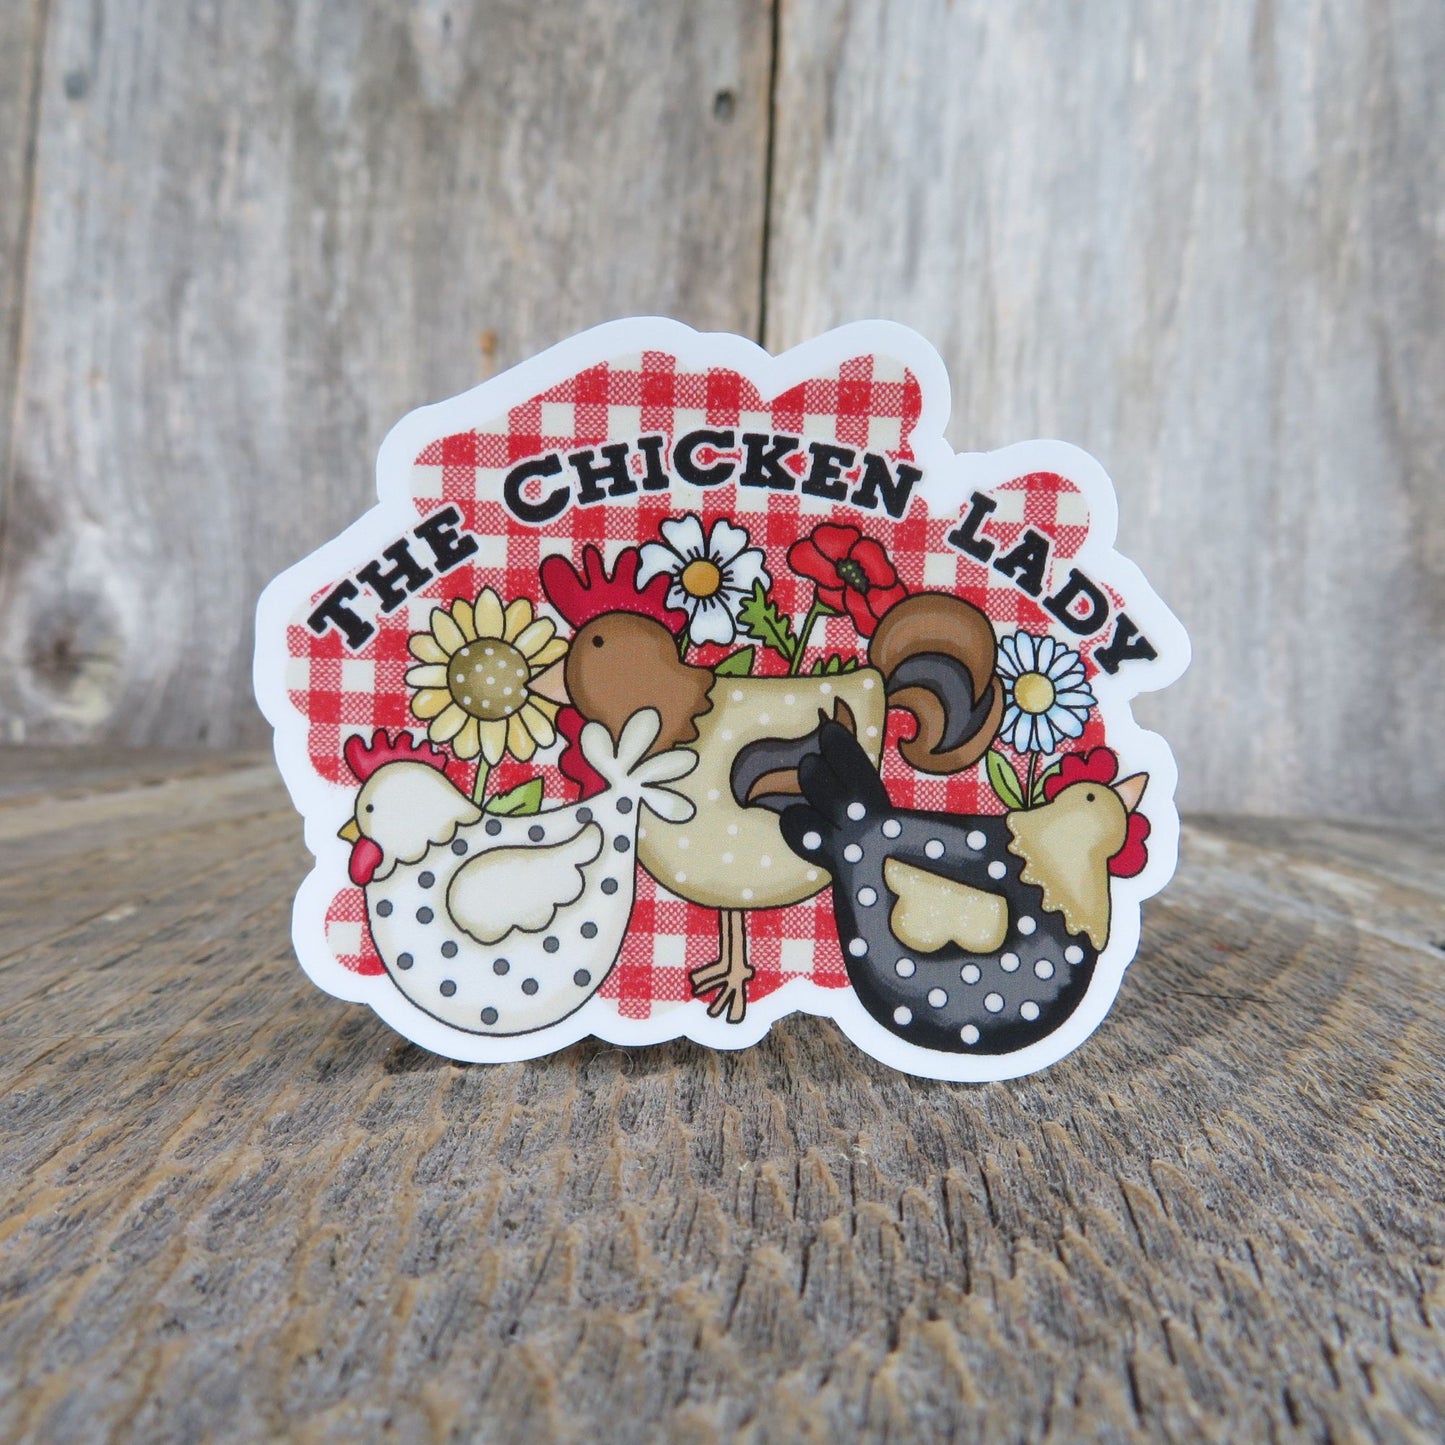 The Chicken Lady Sticker Waterproof Urban Farming Calico Country Style Full Color Raising Chickens